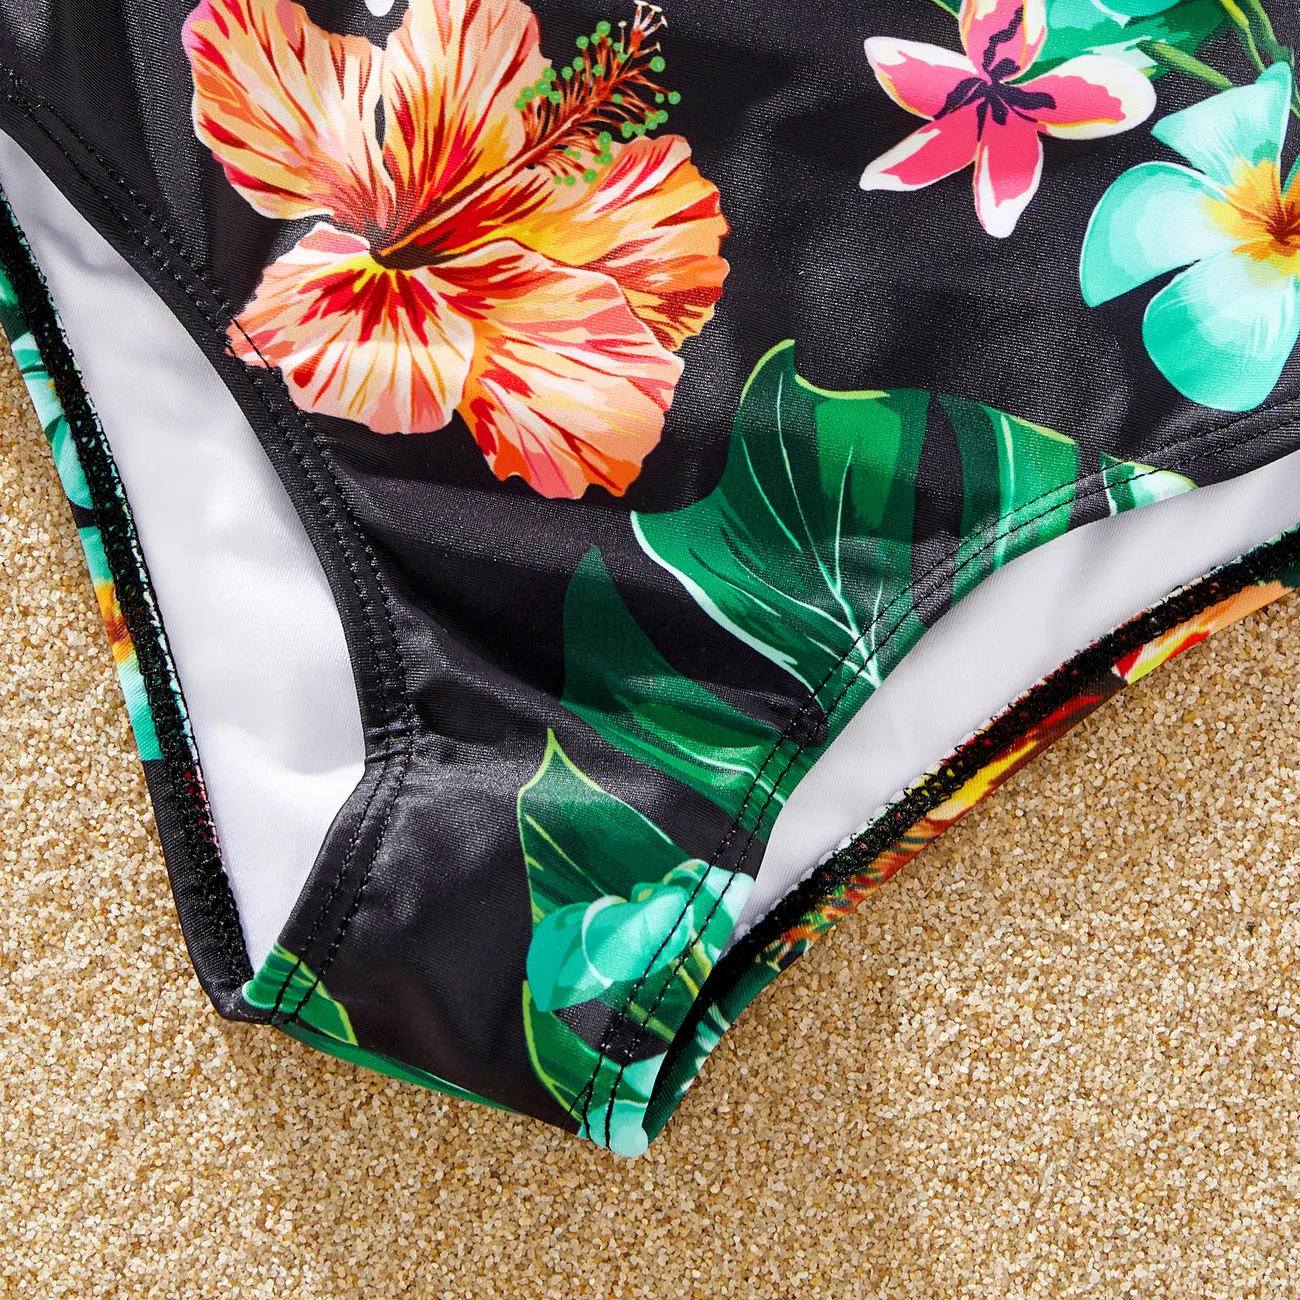 Family Matching Allover Tropical Plant Print One-piece Swimsuit and Swim Trunks Black big image 1